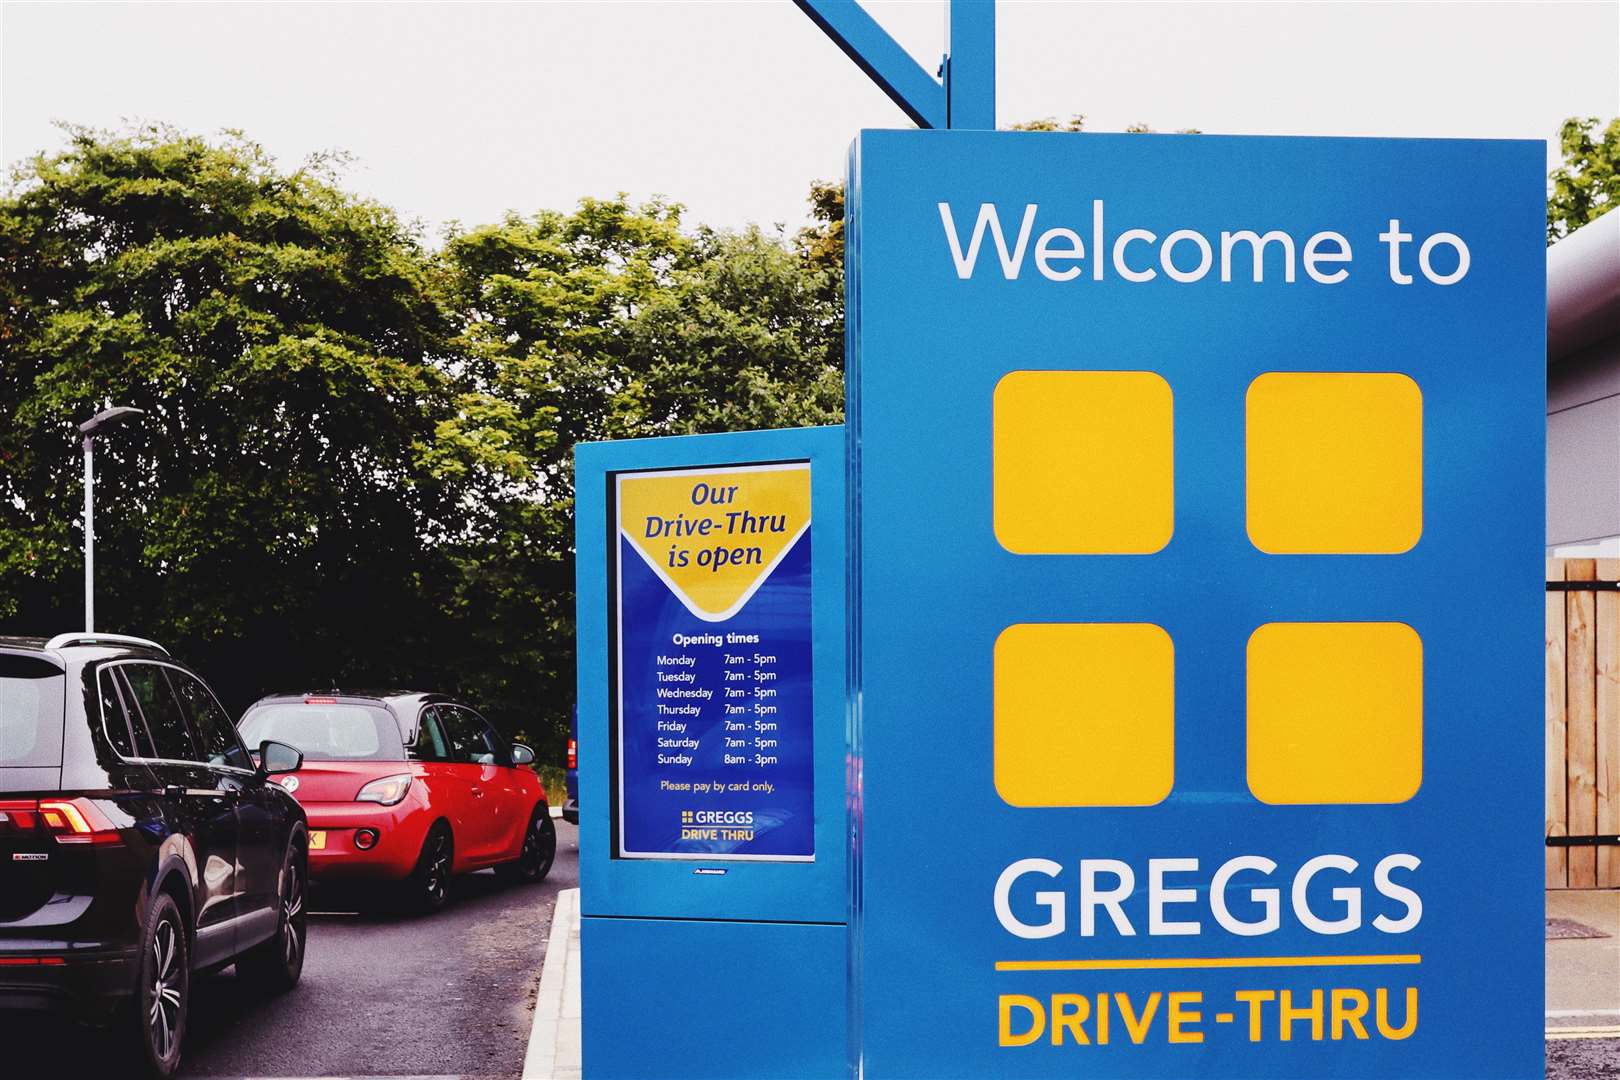 Greggs have opened more drive-thru sites as they have grown more popular during the pandemic (Greggs/PA)